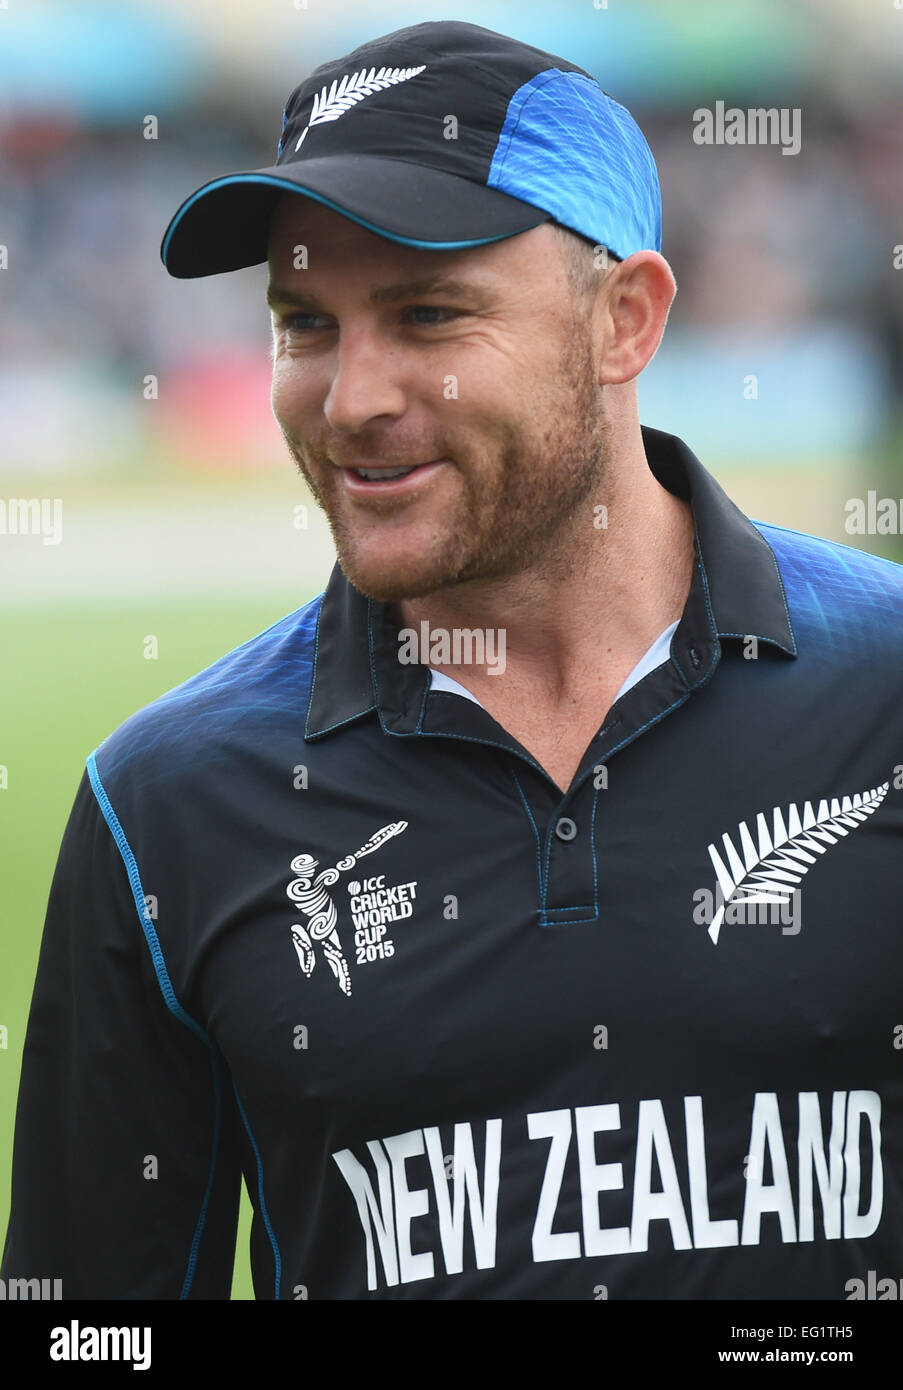 Christchurch, New Zealand. 14th Feb, 2015. Brendon McCullum during the ICC  Cricket World Cup match between New Zealand and Sri Lanka at Hagley Oval in  Christchurch, New Zealand. Saturday 14 February 2015. ©